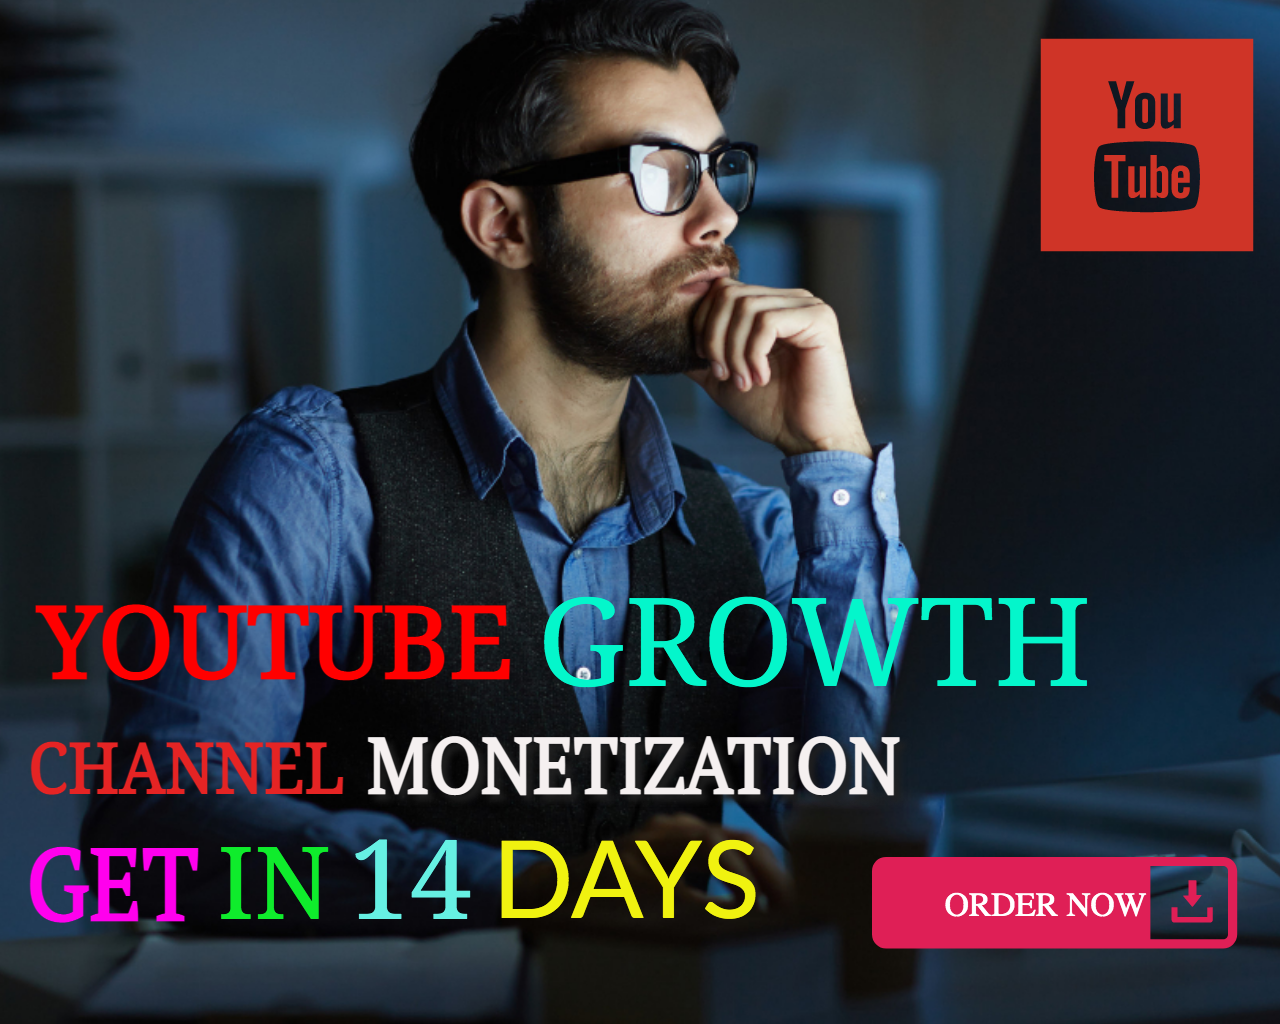 I will guarantee to monetize your channel in 14 days, FiverrBox